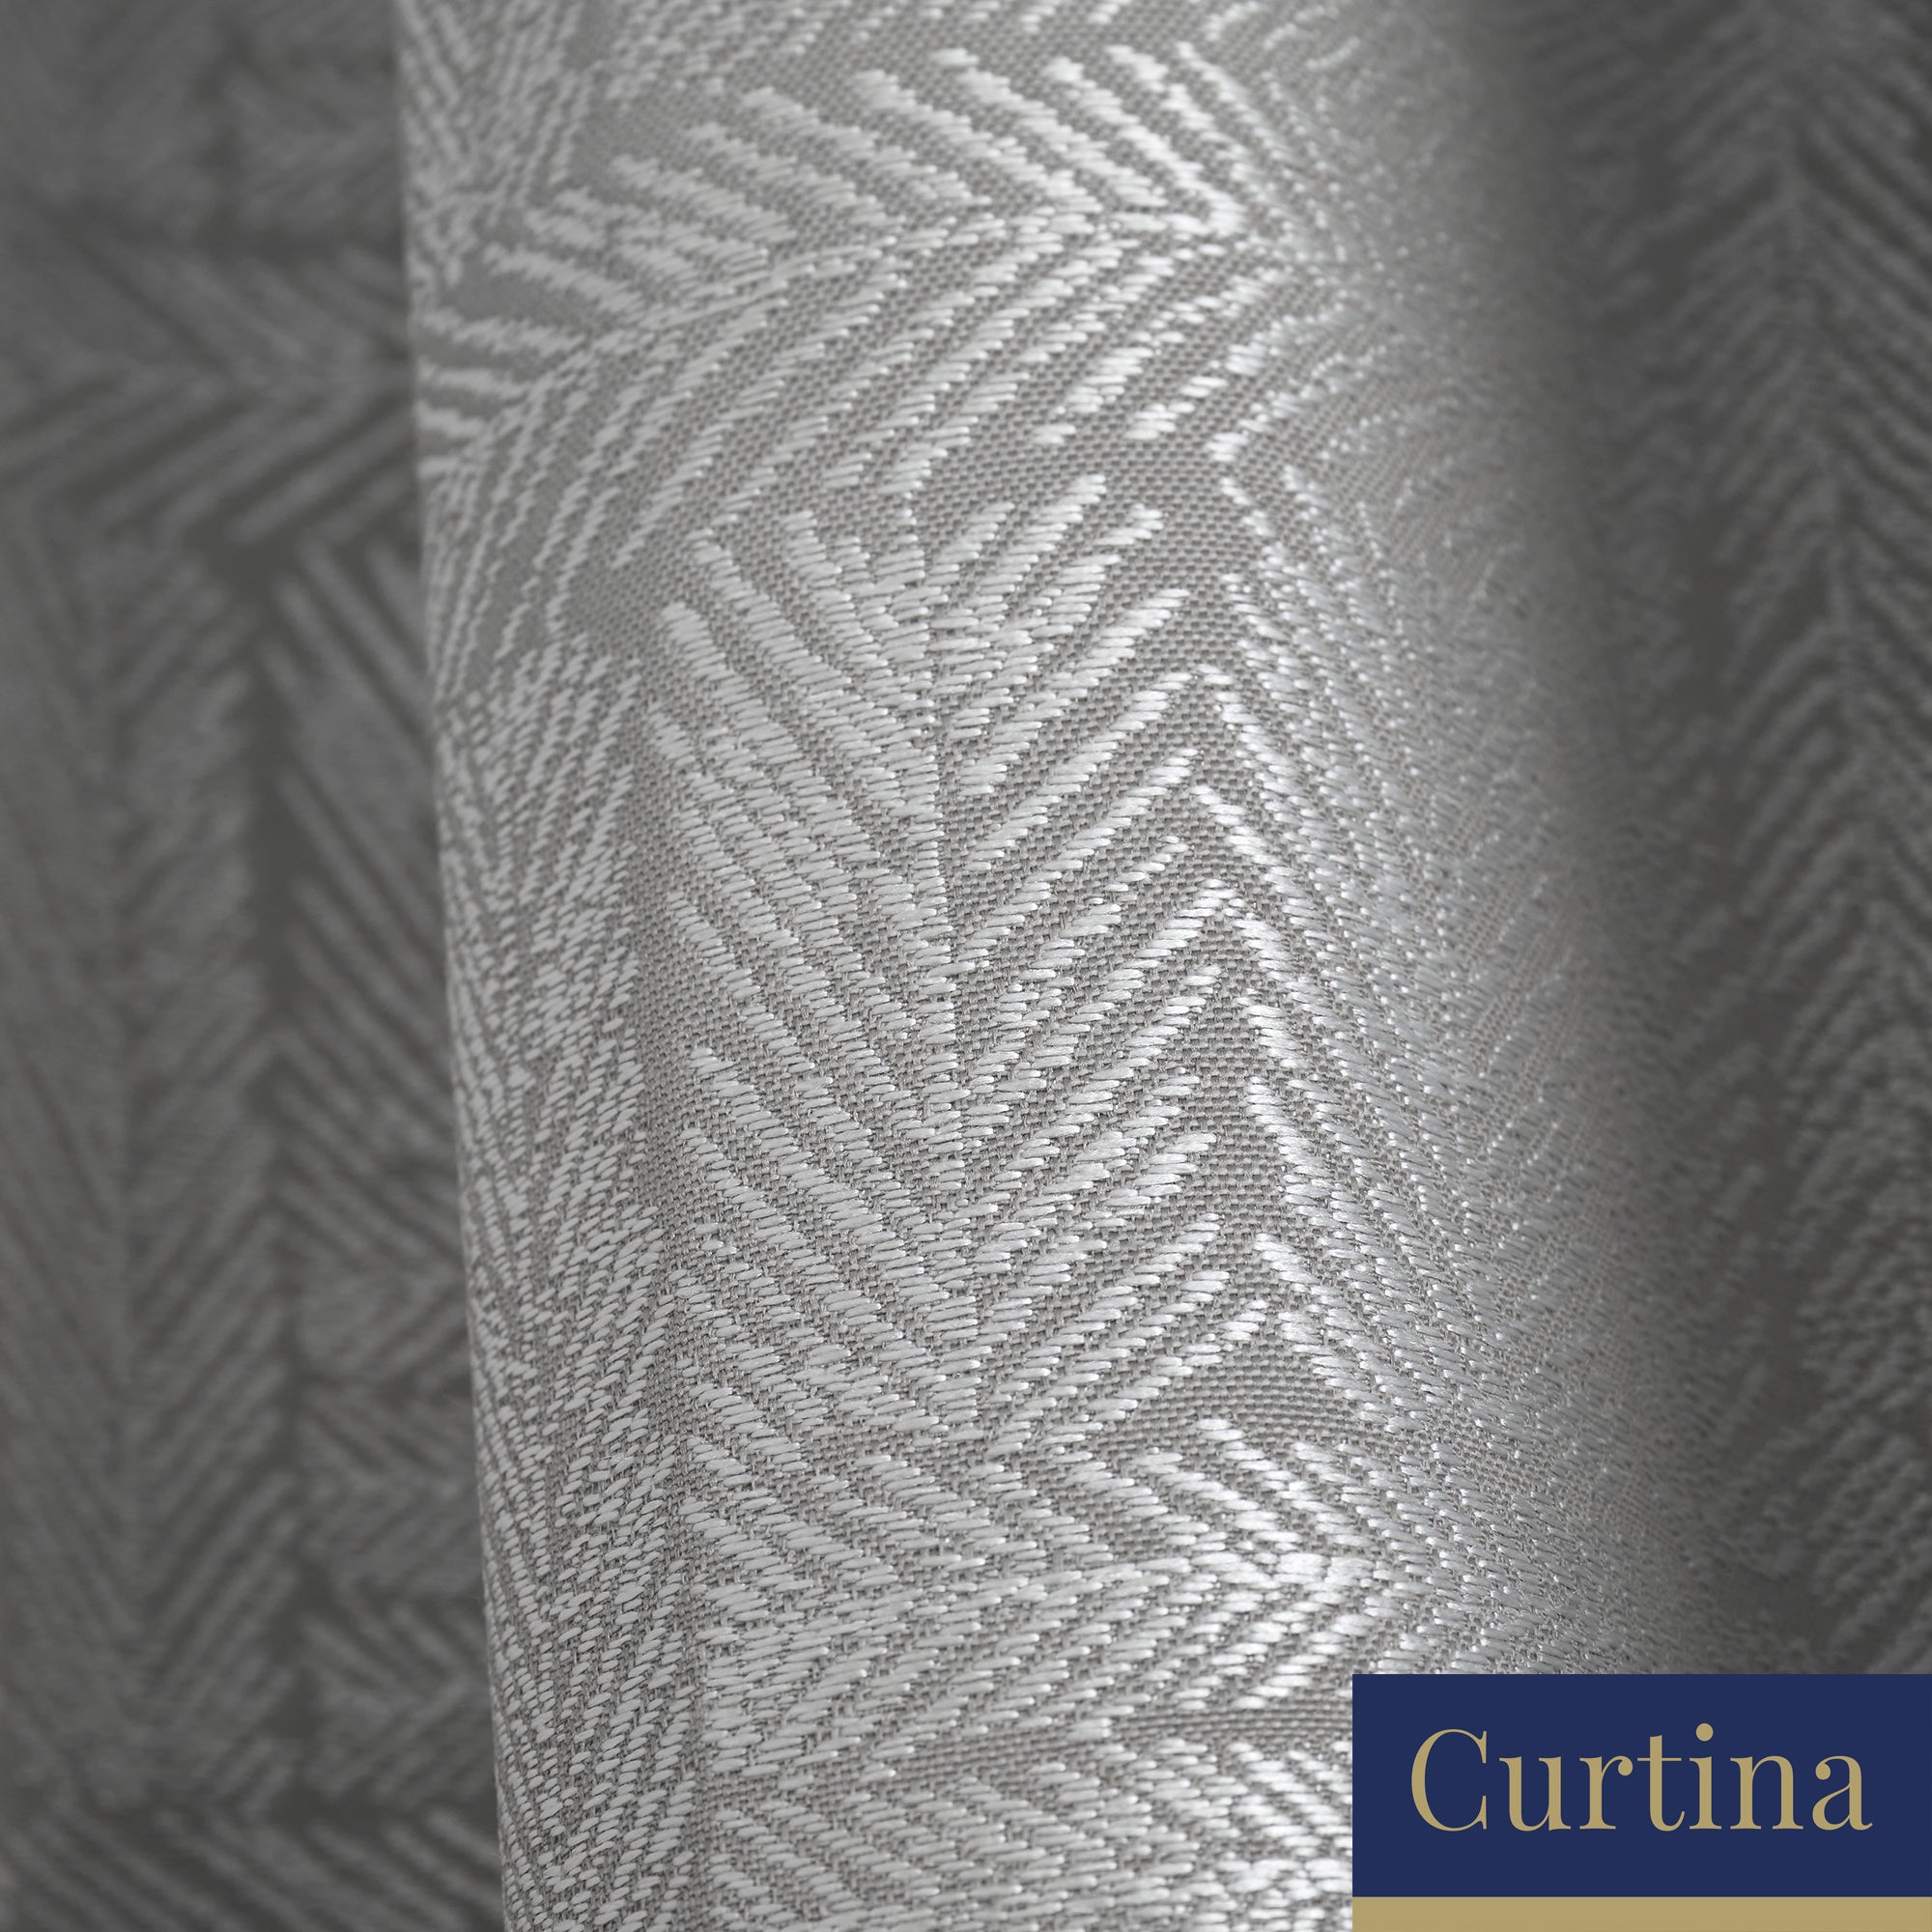 Lowe - Textured stripes Jacquard Eyelet Curtains in Charcoal - By Curtina